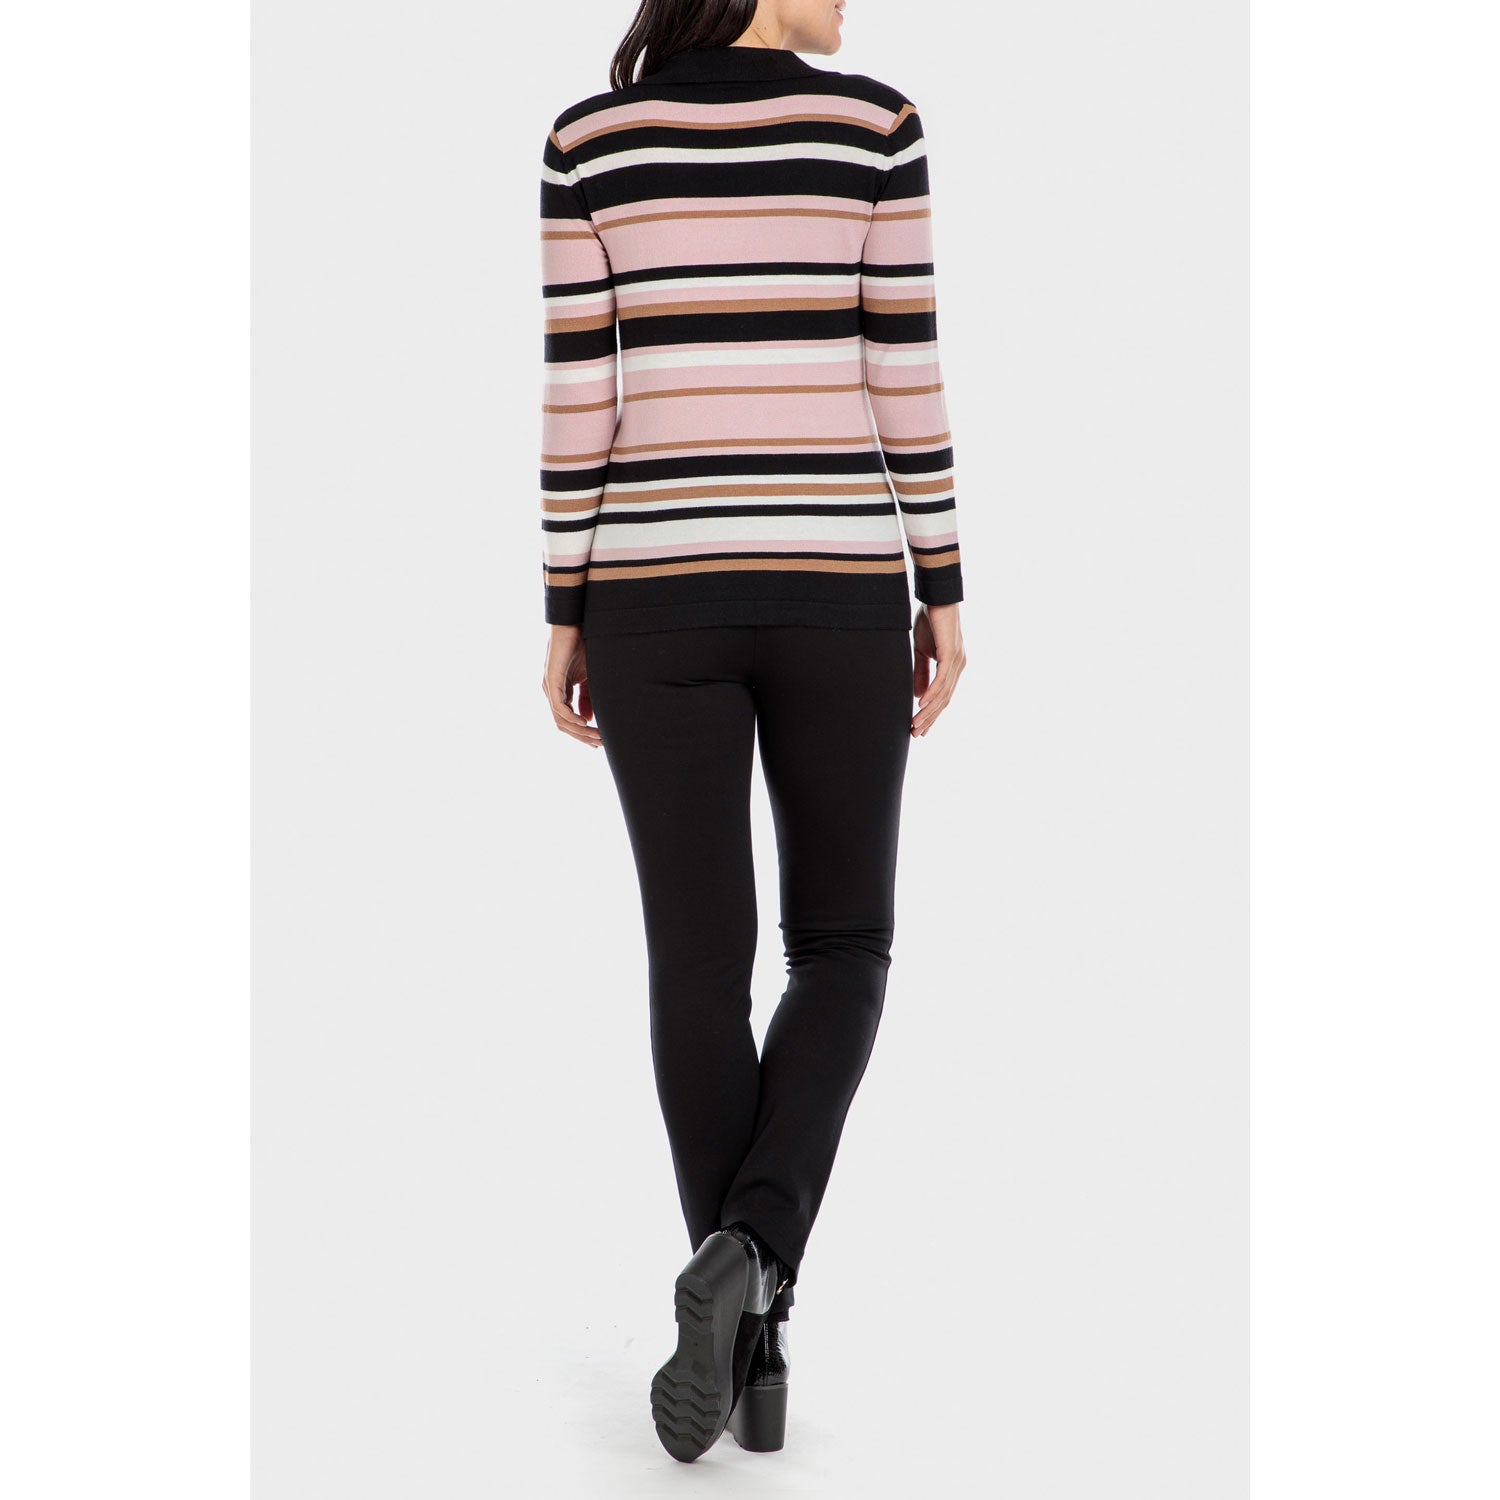 Punt Roma Multi-Coloured Striped Sweater - Black 4 Shaws Department Stores